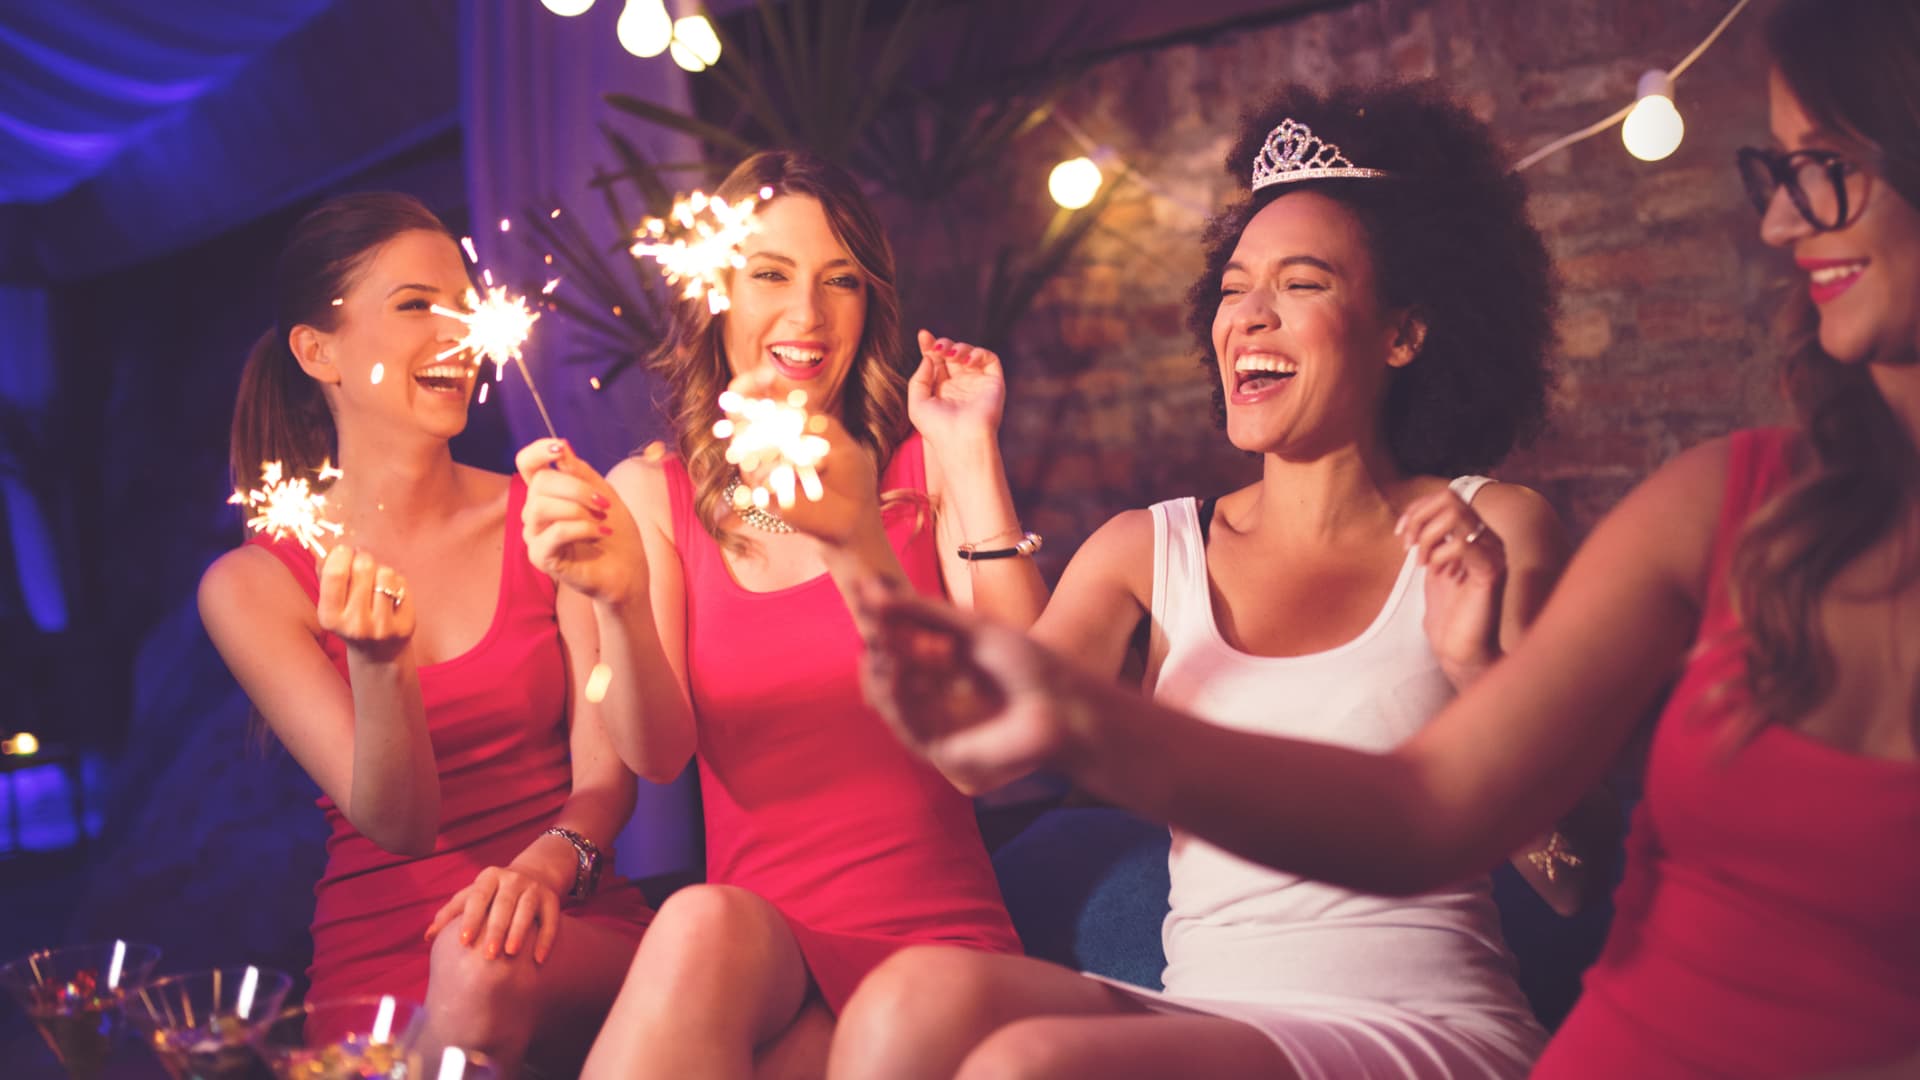 In the U.S., the average cost to attend at bachelorette party is $537. 